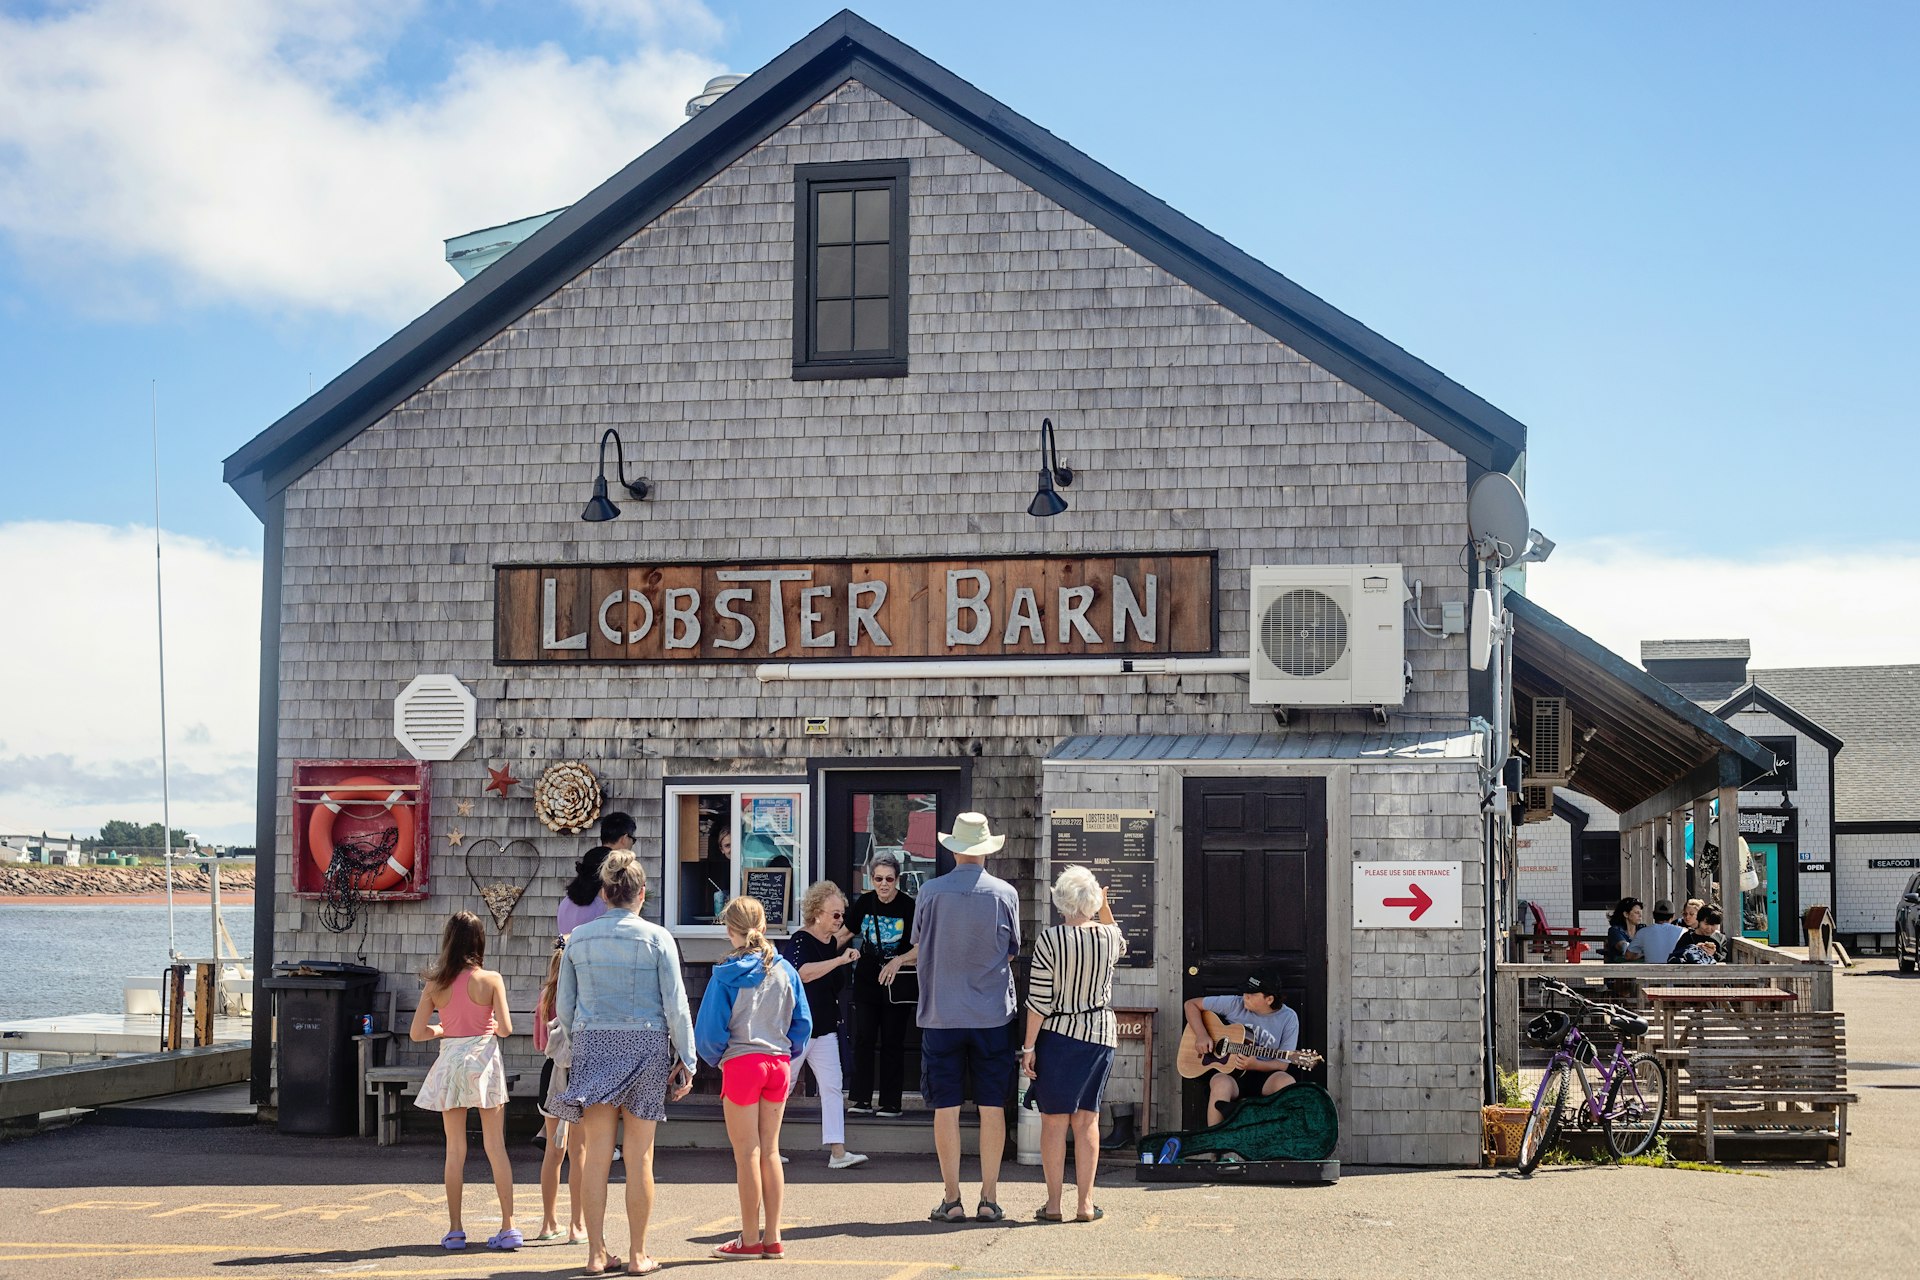 Several people linger outside a seaside lobster restaurant, where a busker is playing a guitar